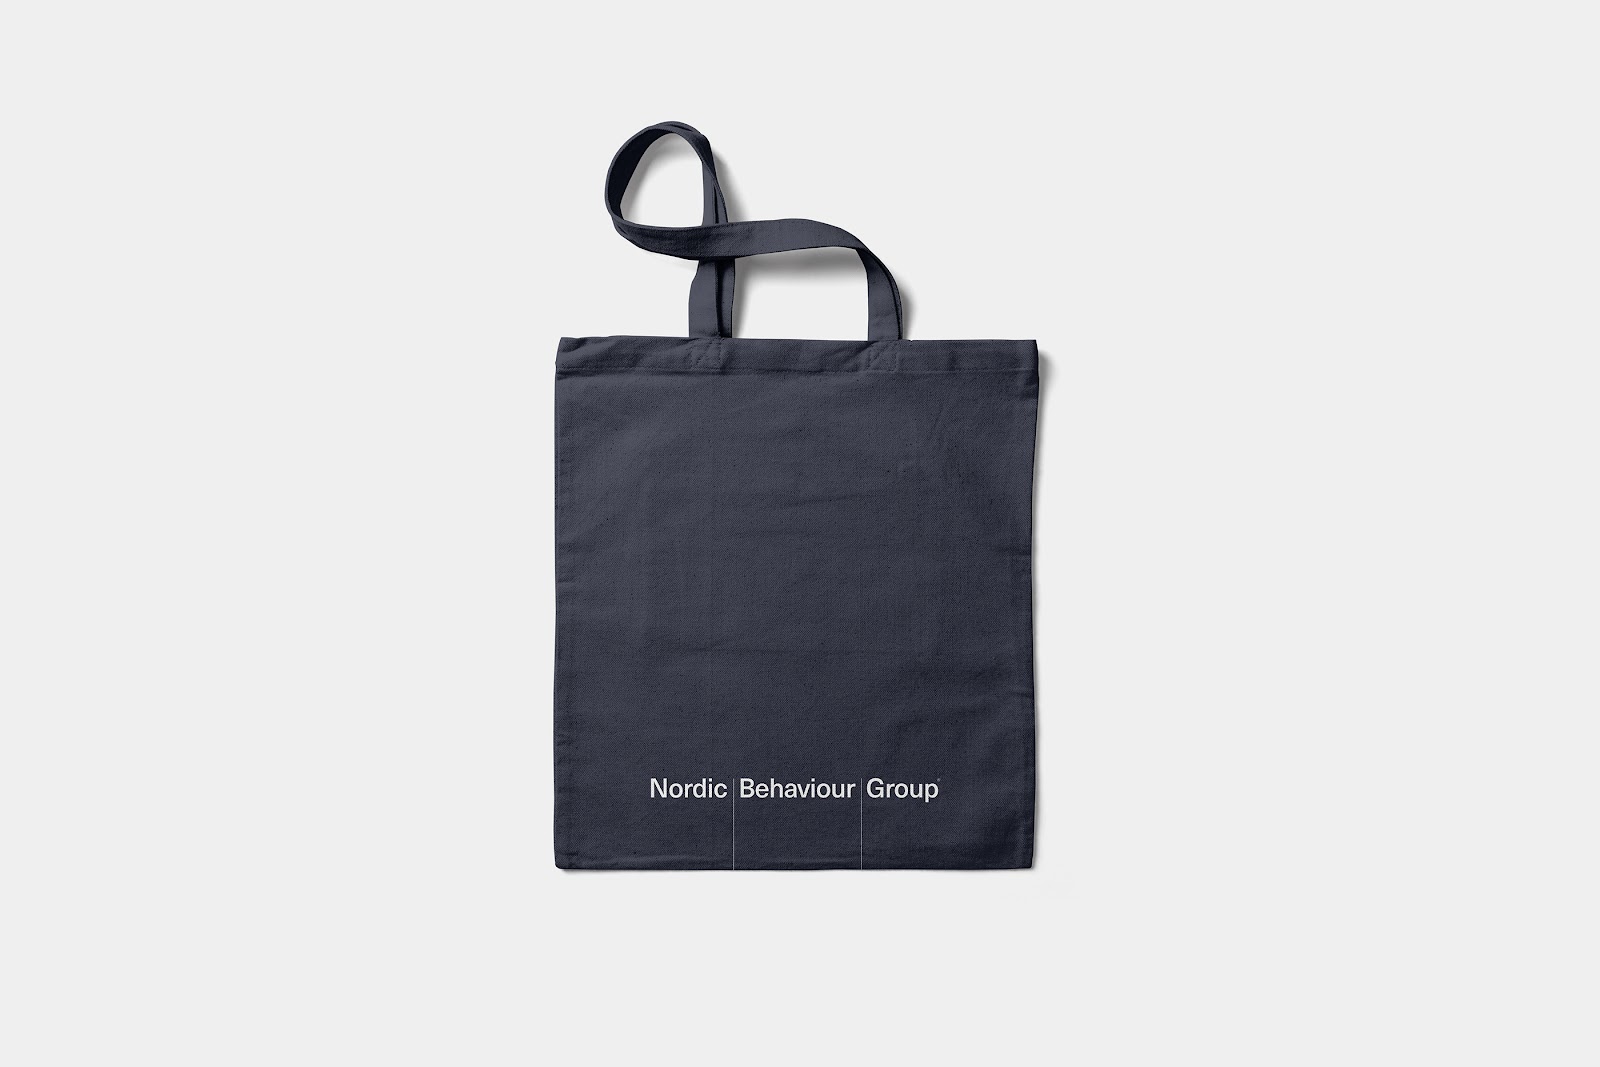 Branding and visual identity artifact from NBG project